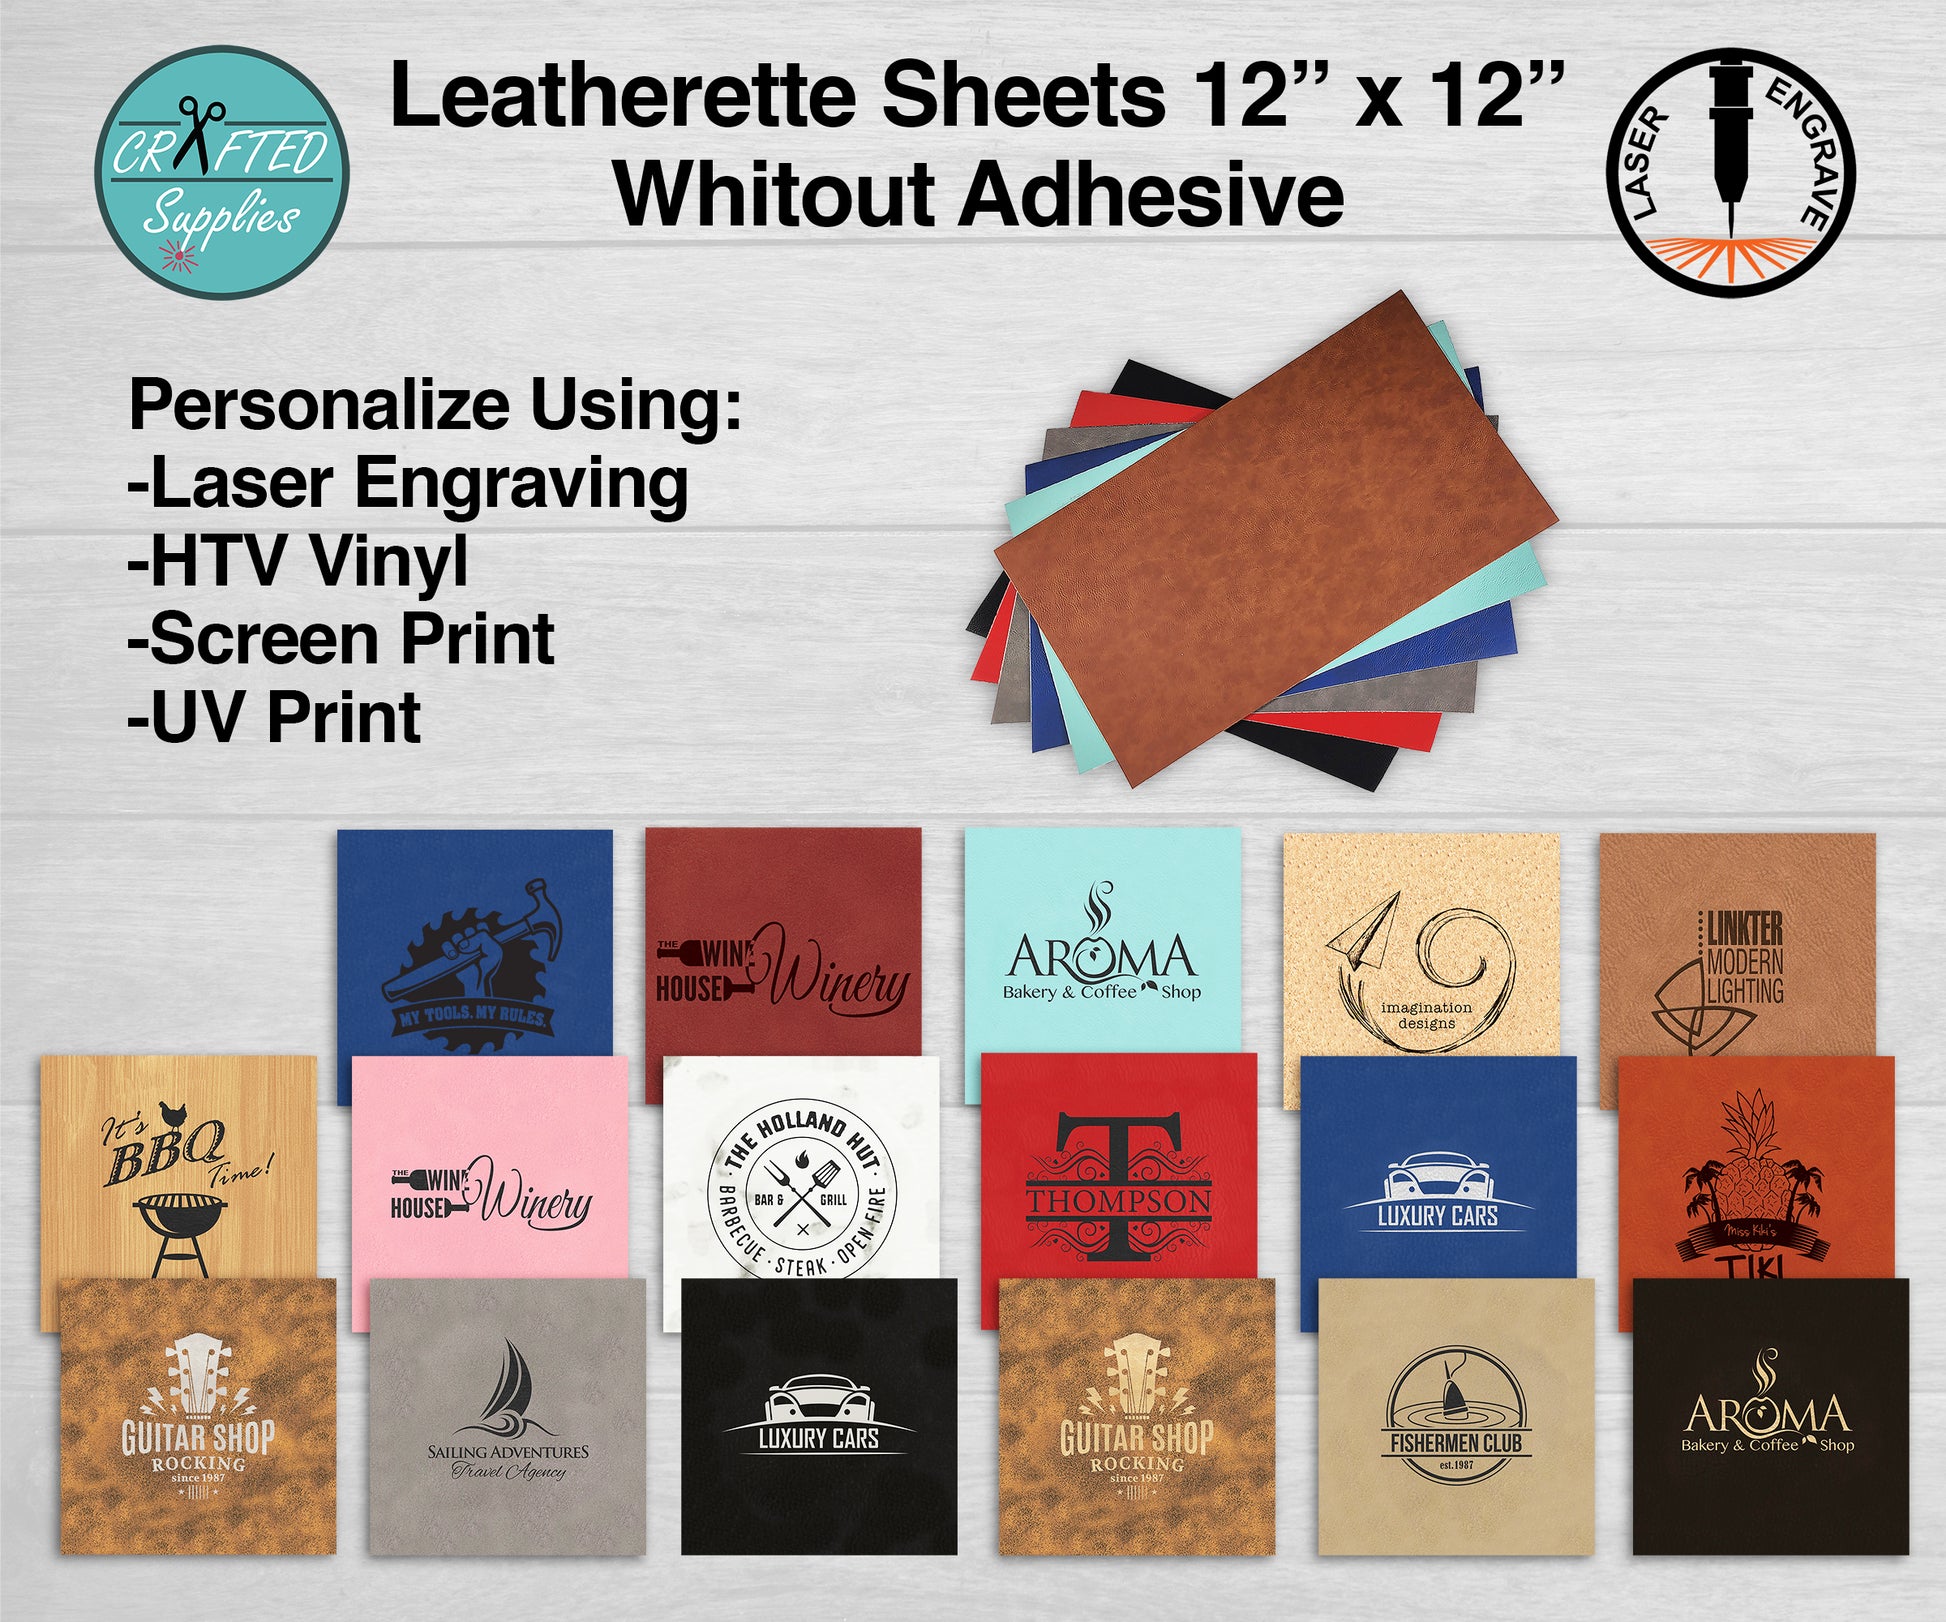 American Personalized Laserable Leather Sheets, Laserable Leatherette 12 x 24, Laser Engraving Supplies, for Glowforge Supplies and Materials (White Marble/Black)